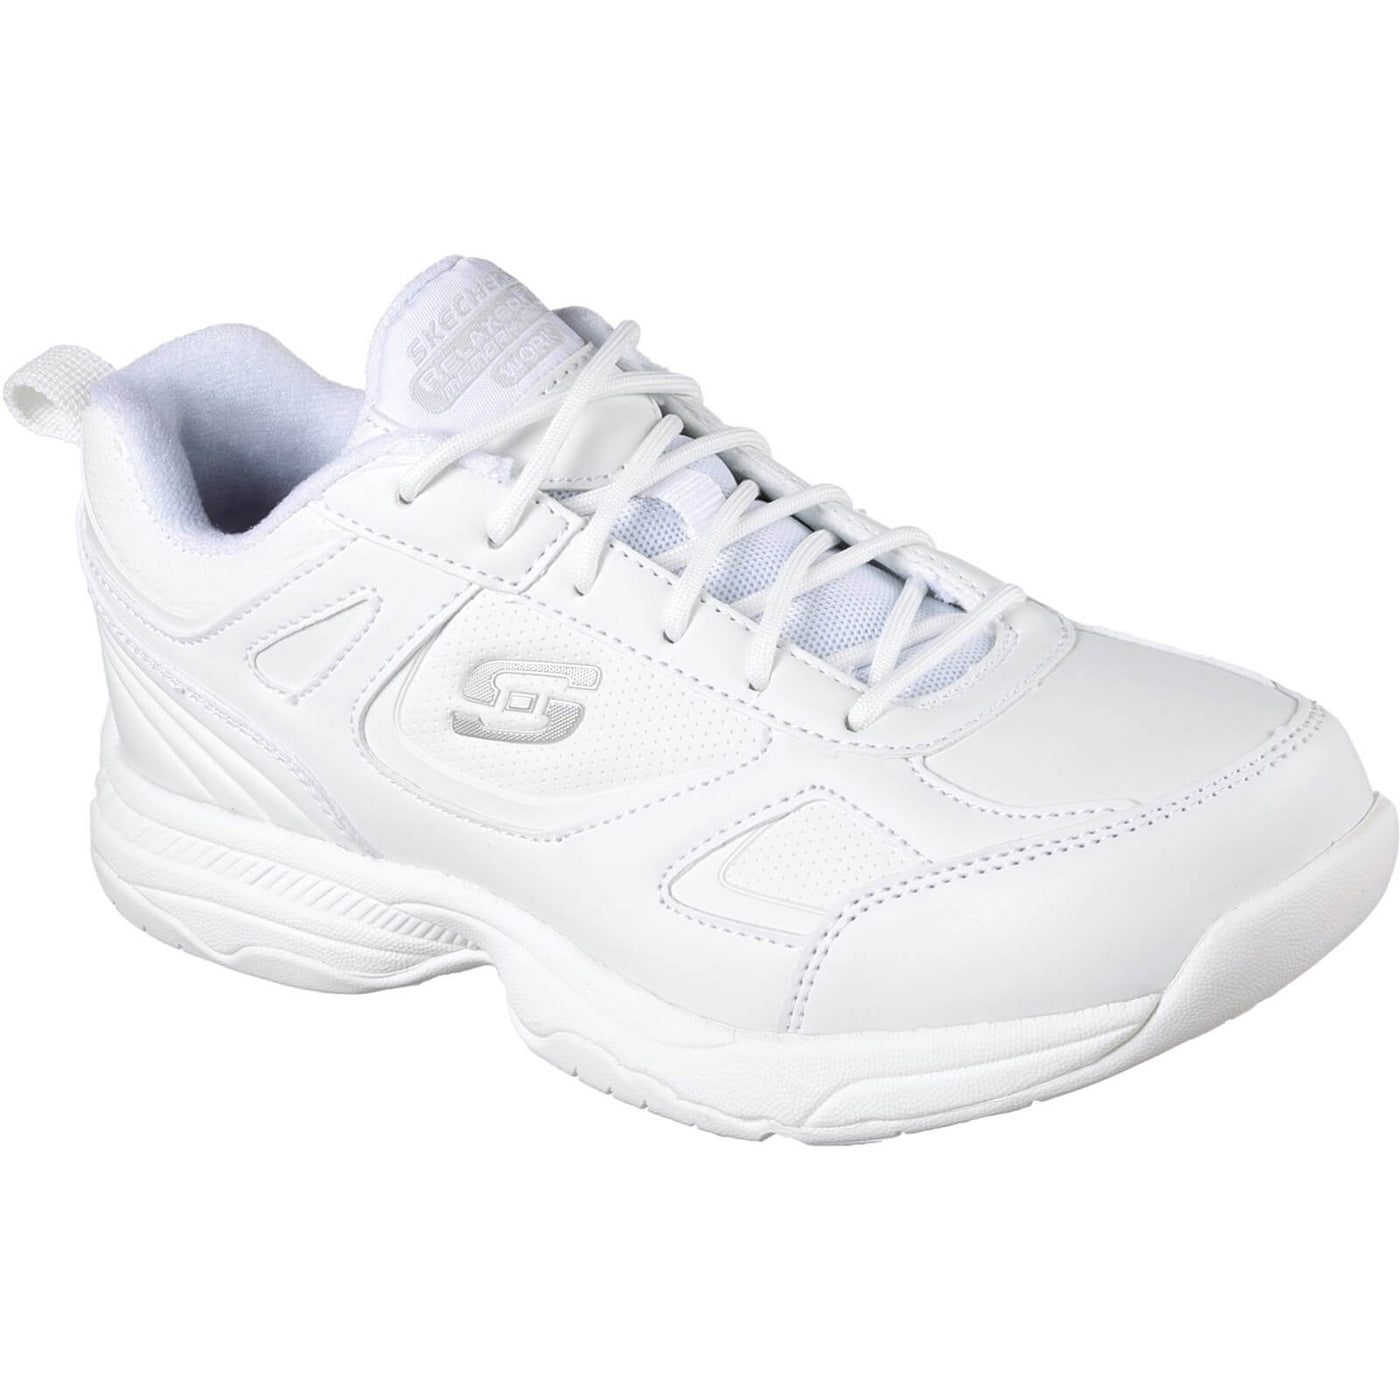 Skechers Work Relaxed Fit: Dighton - Bricelyn SR Safety Shoes White 1#colour_white